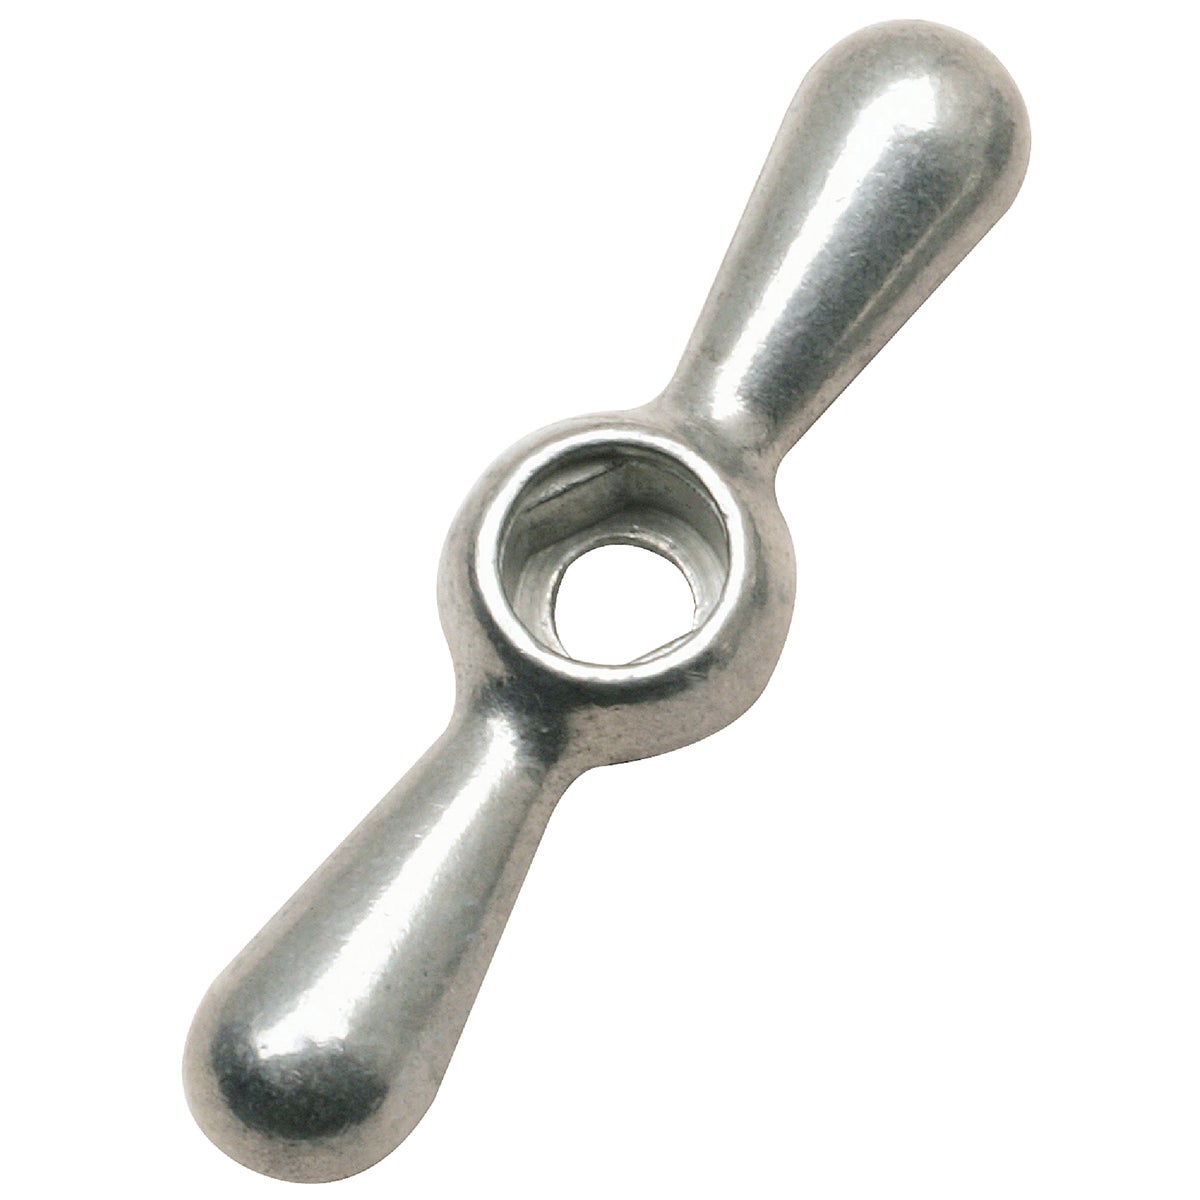 Item 489840, Tee handle for use with square stem.<br>
<br><b>No. DIB806-17:</b> Material: Metal, Pkg Qty: 1, Package Type: Card